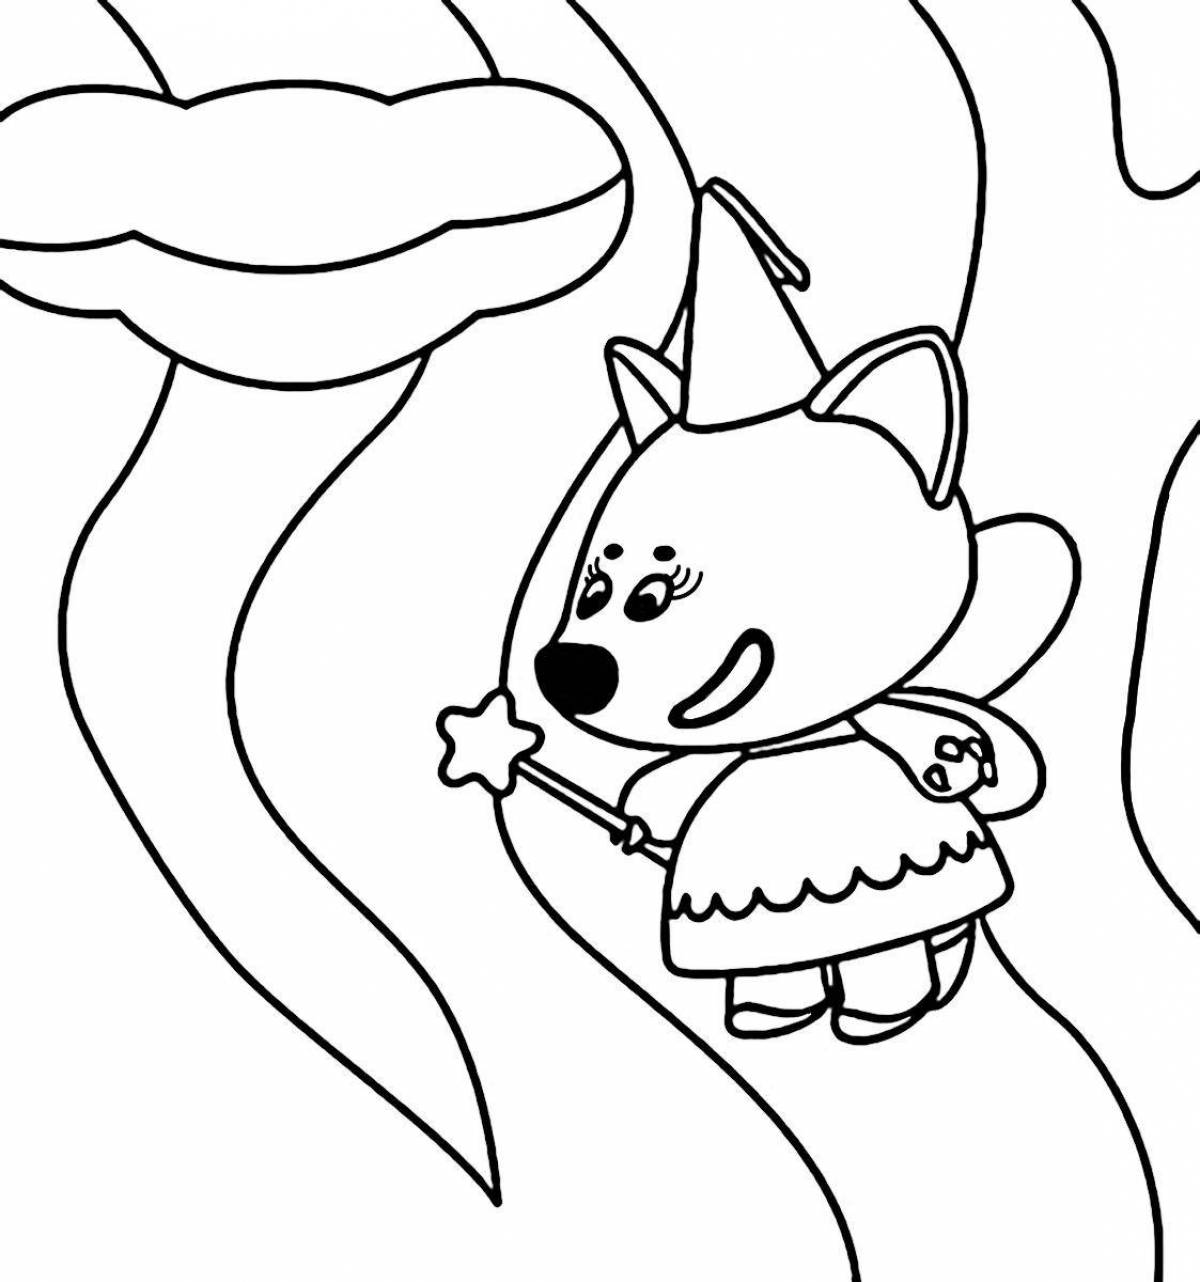 Fun fox coloring book for 3-4 year olds